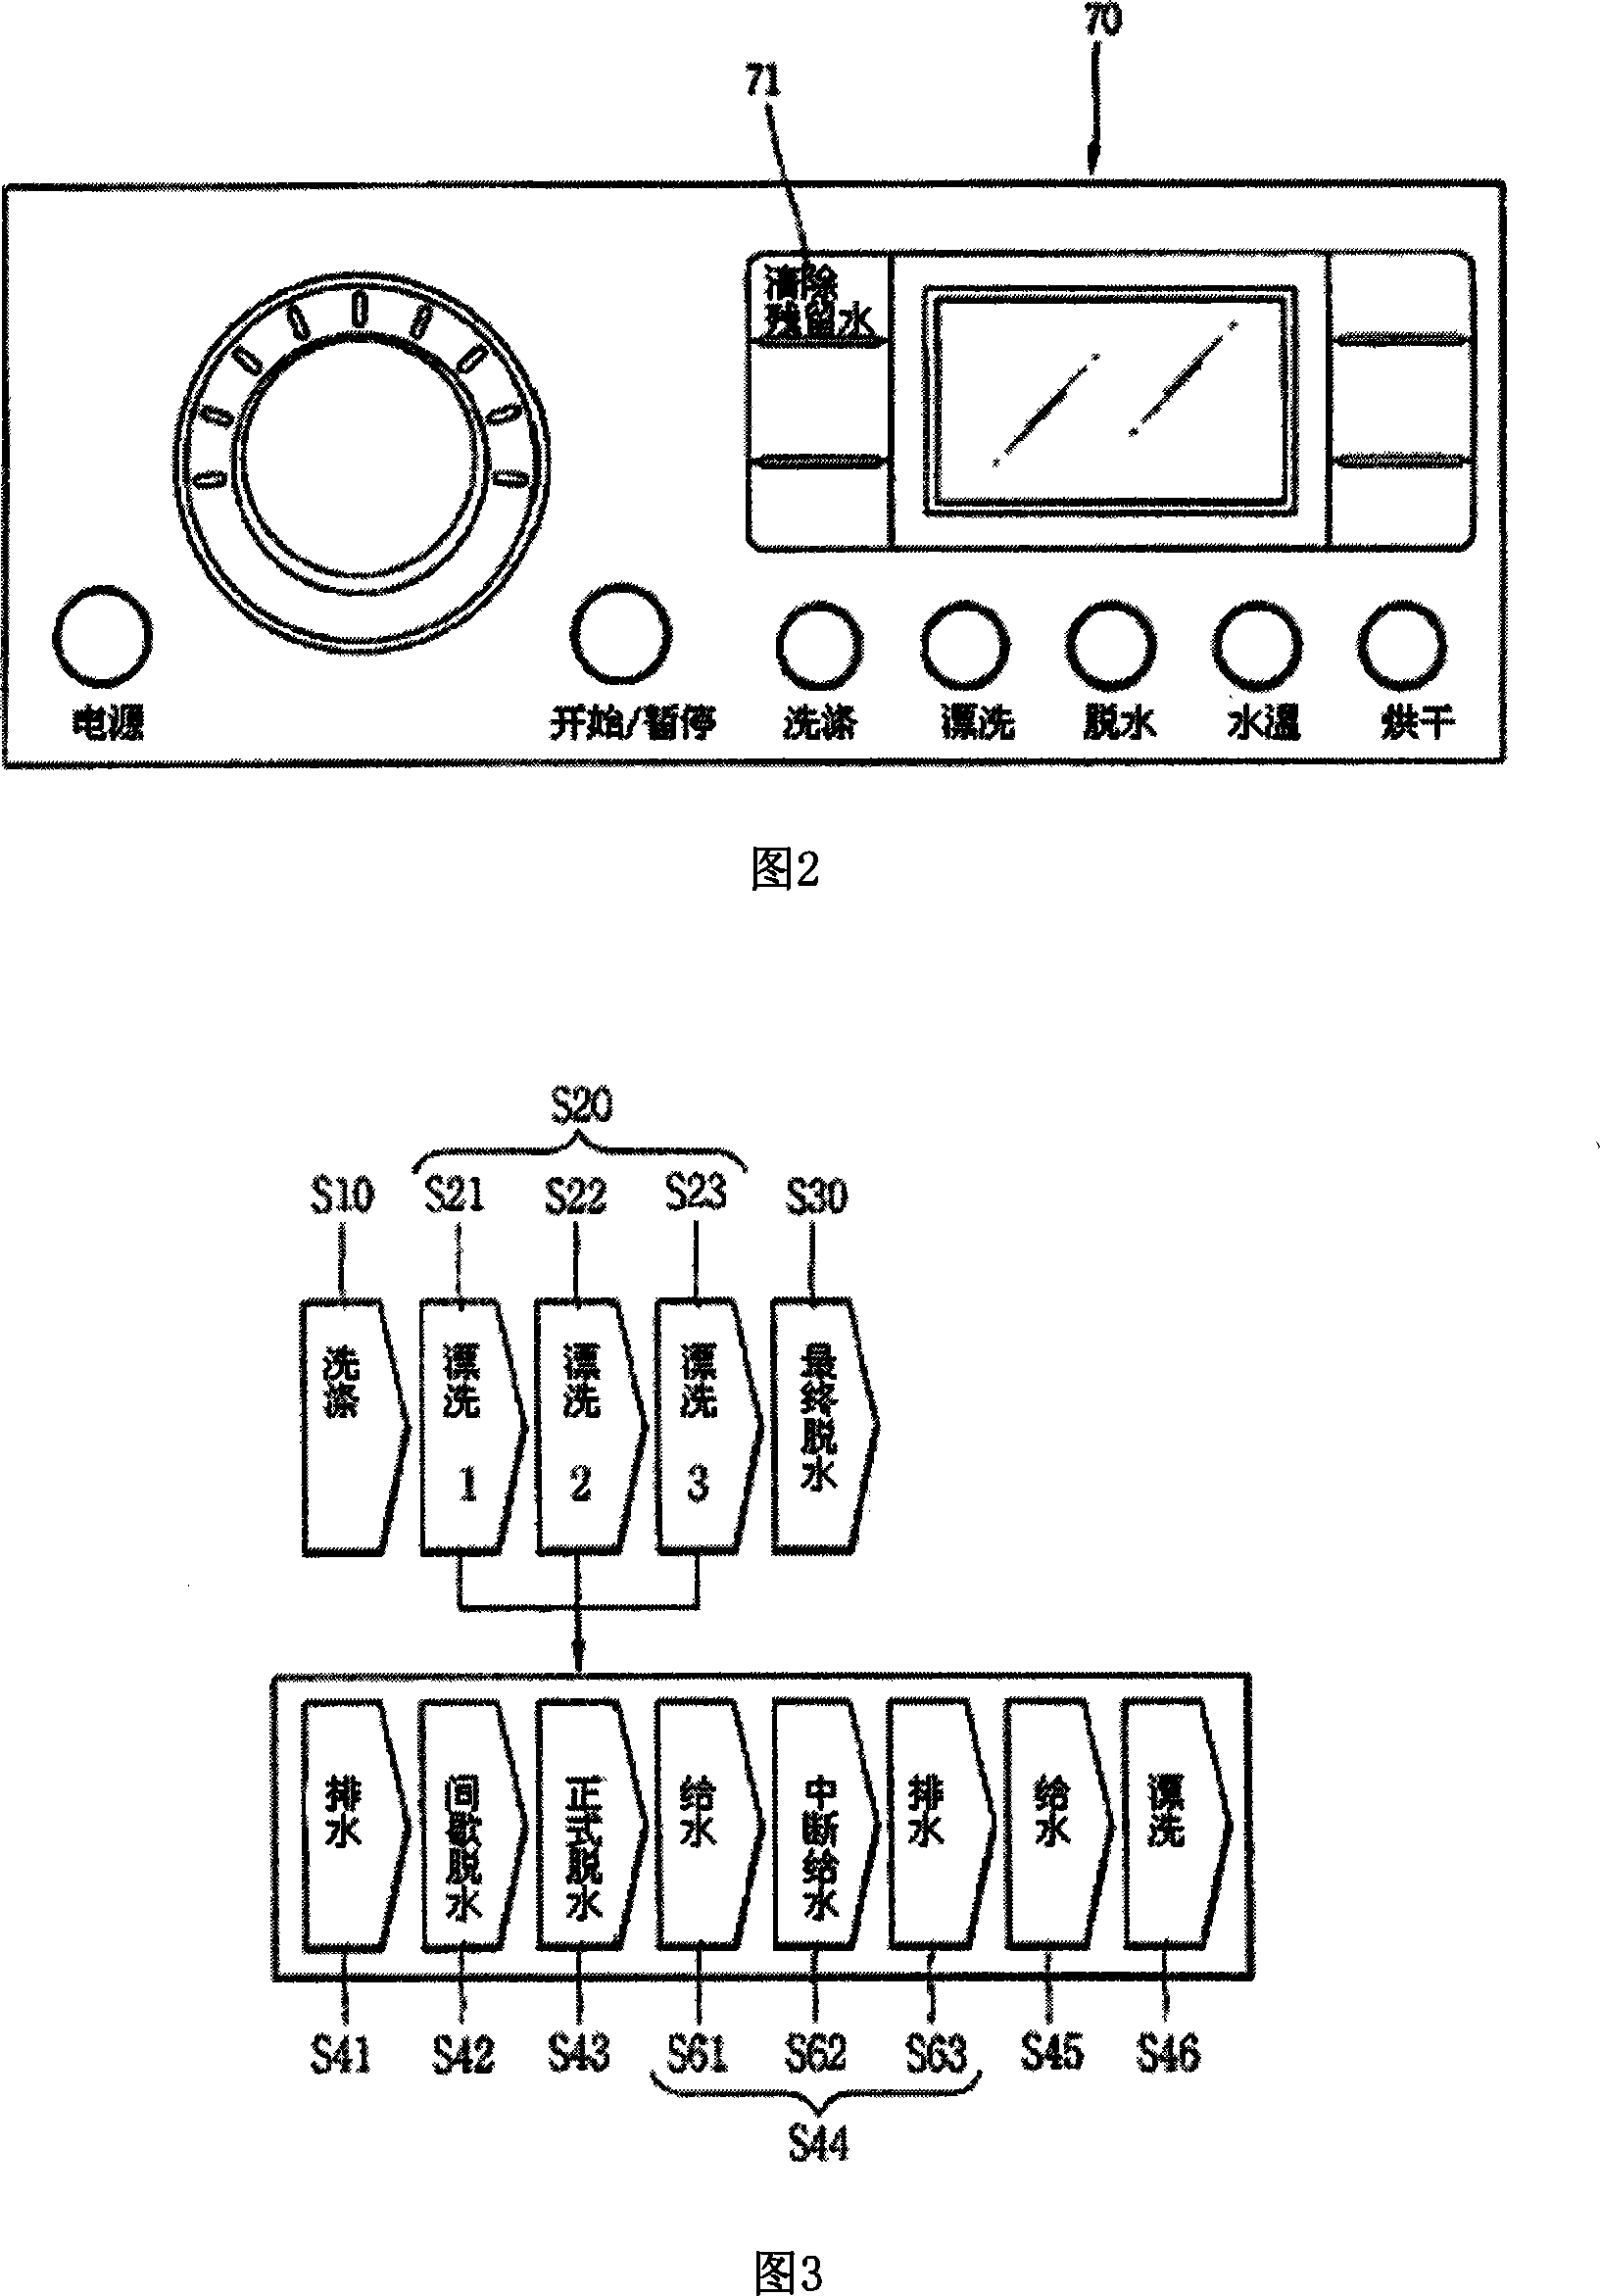 Operation methods of laundry machine and laundry machine working as the method